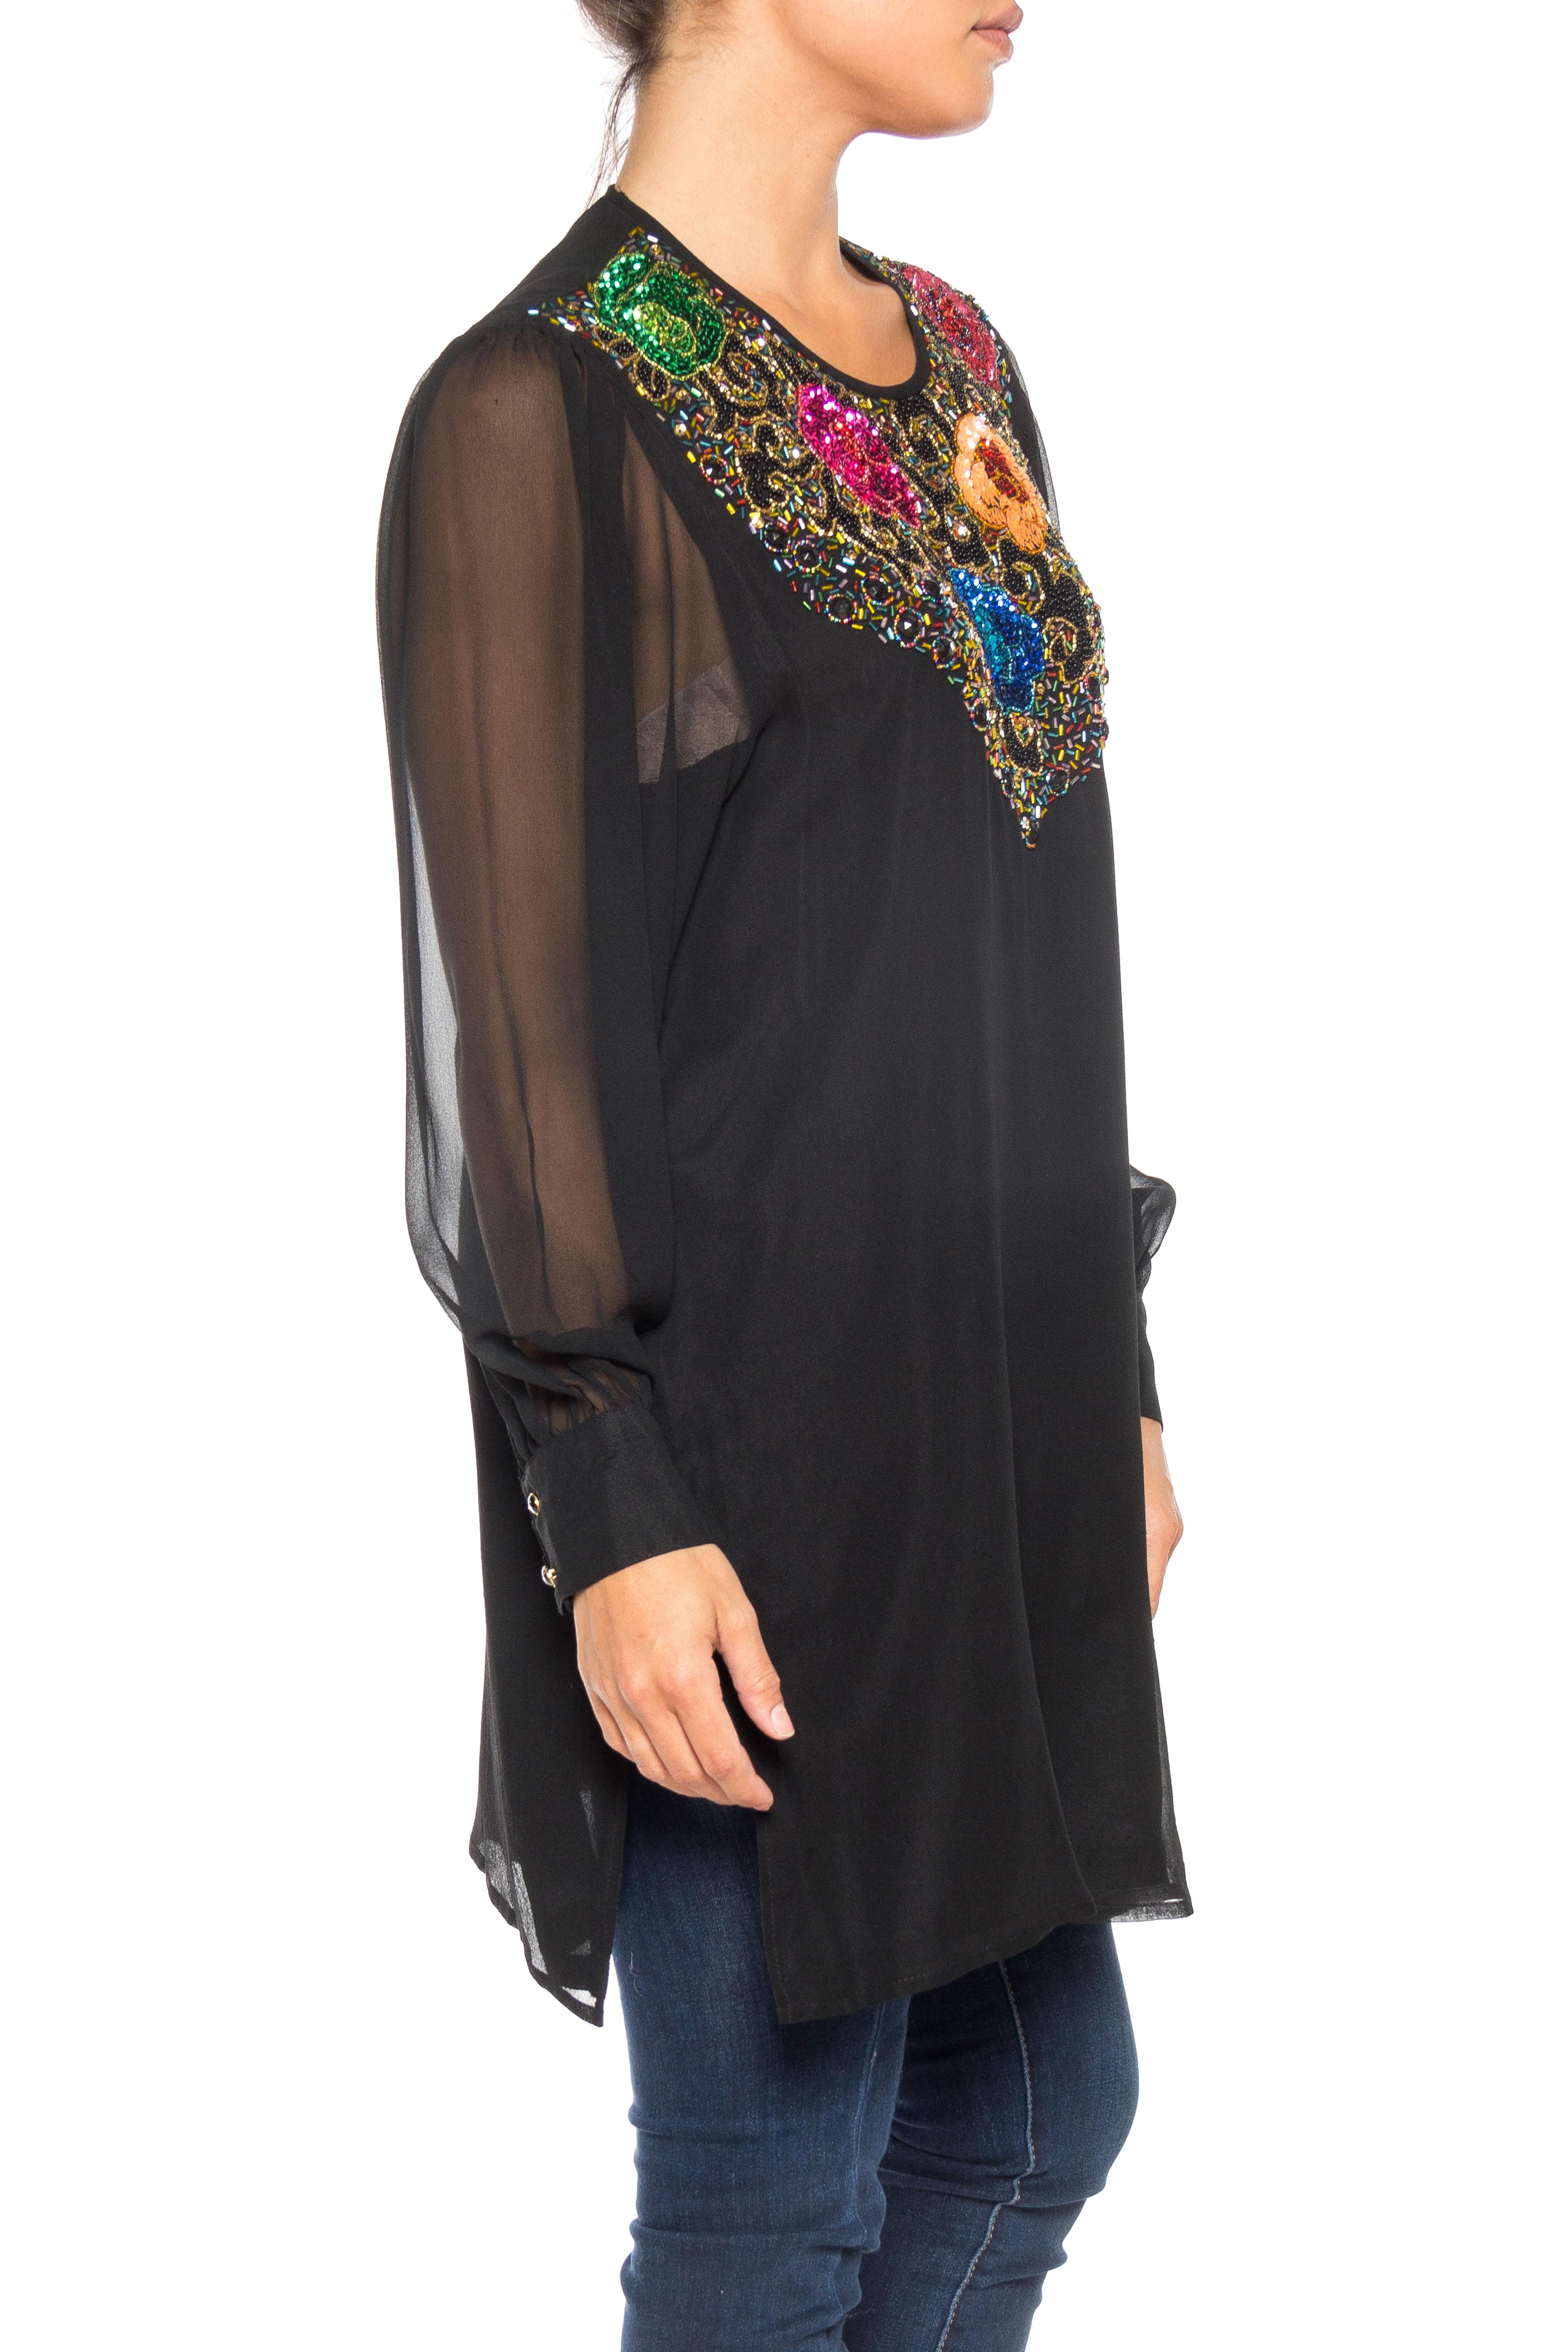 Women's 1980S DIANE FREIS Black Beaded Silk Chiffon Cocktail Tunic Blouse With Sheer Sl For Sale